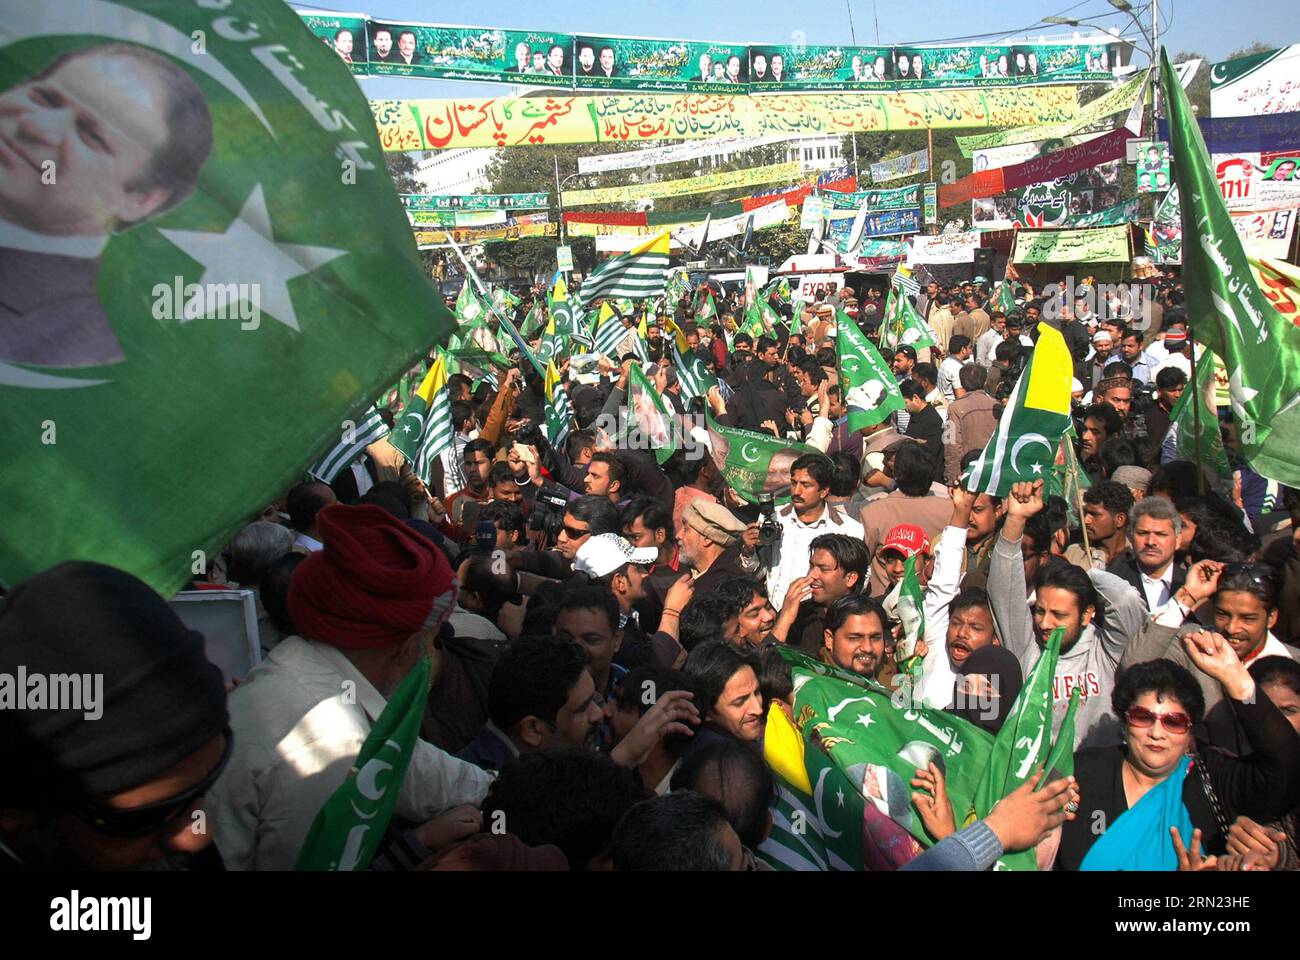 (150205) -- LAHORE, Feb. 5, 2015 -- Demonstrators attend the Kashmir Solidarity Day rally in eastern Pakistan s Lahore, Feb. 5, 2015. Pakistani Prime Minister Nawaz Sharif said on Thursday his country seeks meaningful and result oriented dialogue with India for the resolution of outstanding issues. However the agenda of Pakistan-India dialogue will remain inconclusive without inclusion of Kashmir dispute, he told legislators in Muzaffarabad, the capital of Pakistan-administered Kashmir. ) PAKISTAN-LAHORE-KASHMIR-SOLIDARITY DAY Sajjad PUBLICATIONxNOTxINxCHN   Lahore Feb 5 2015 demonstrator atte Stock Photo